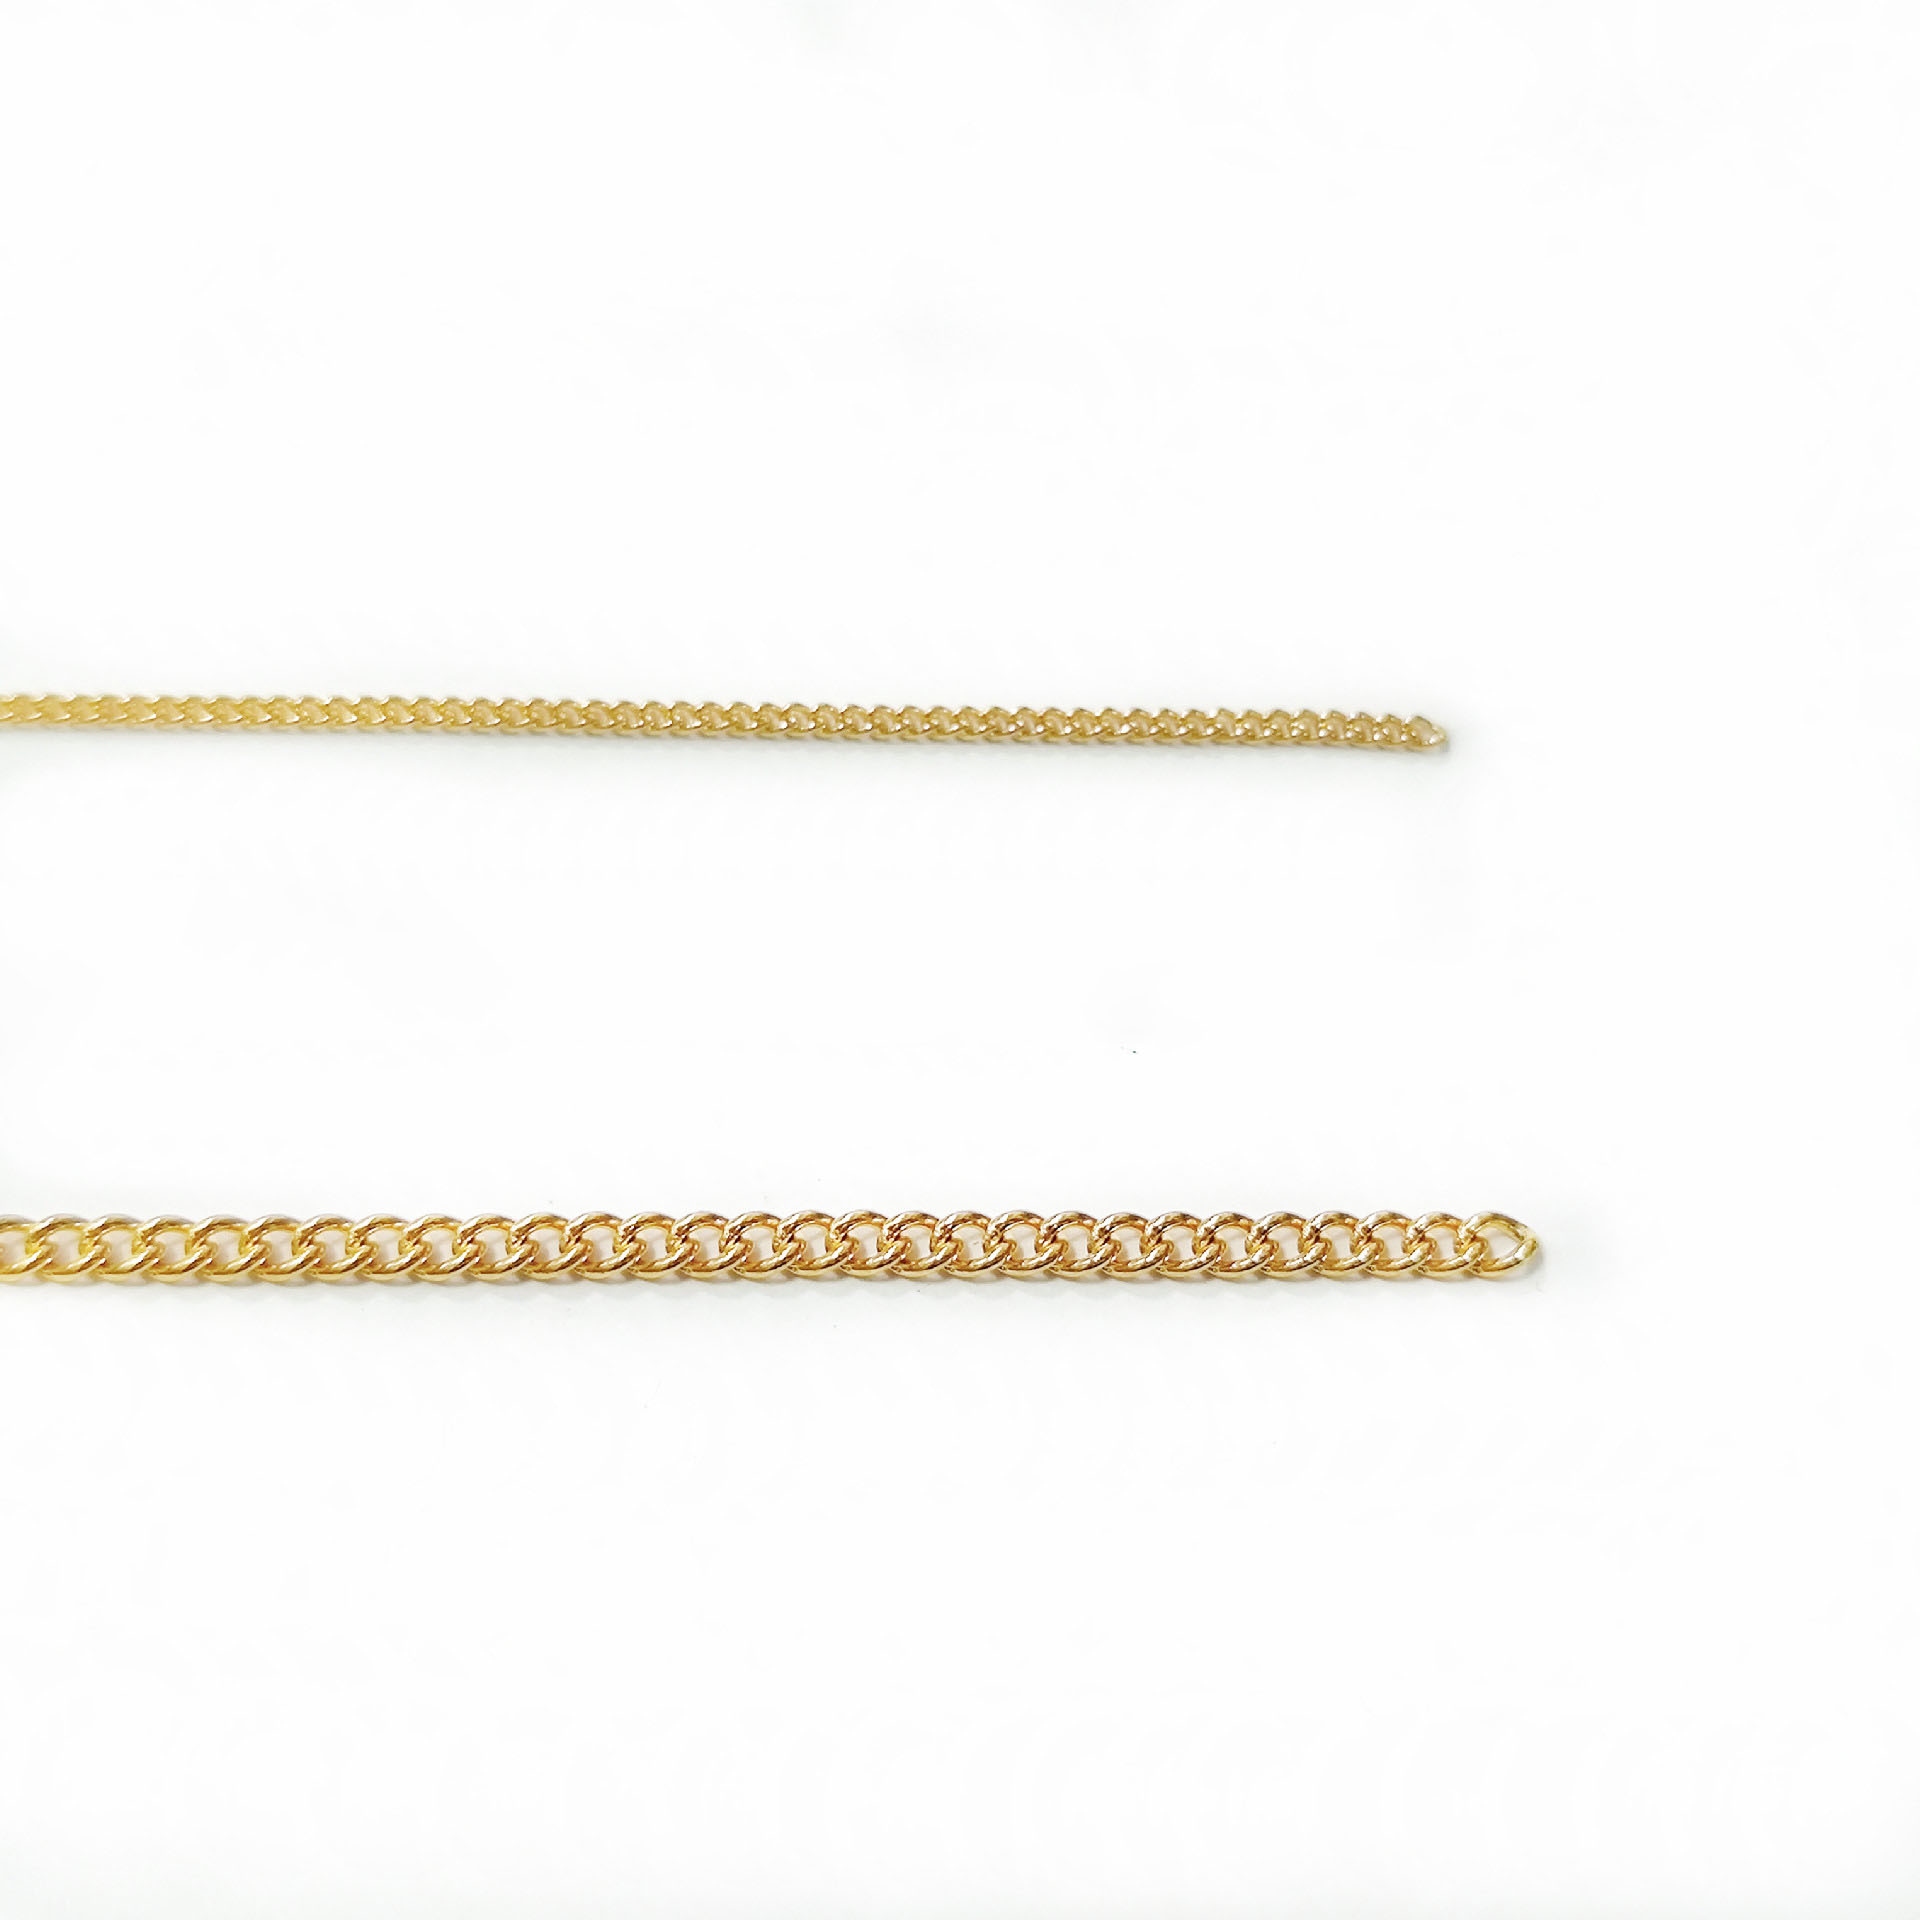 0.4 line*chain width 1.5mm gold